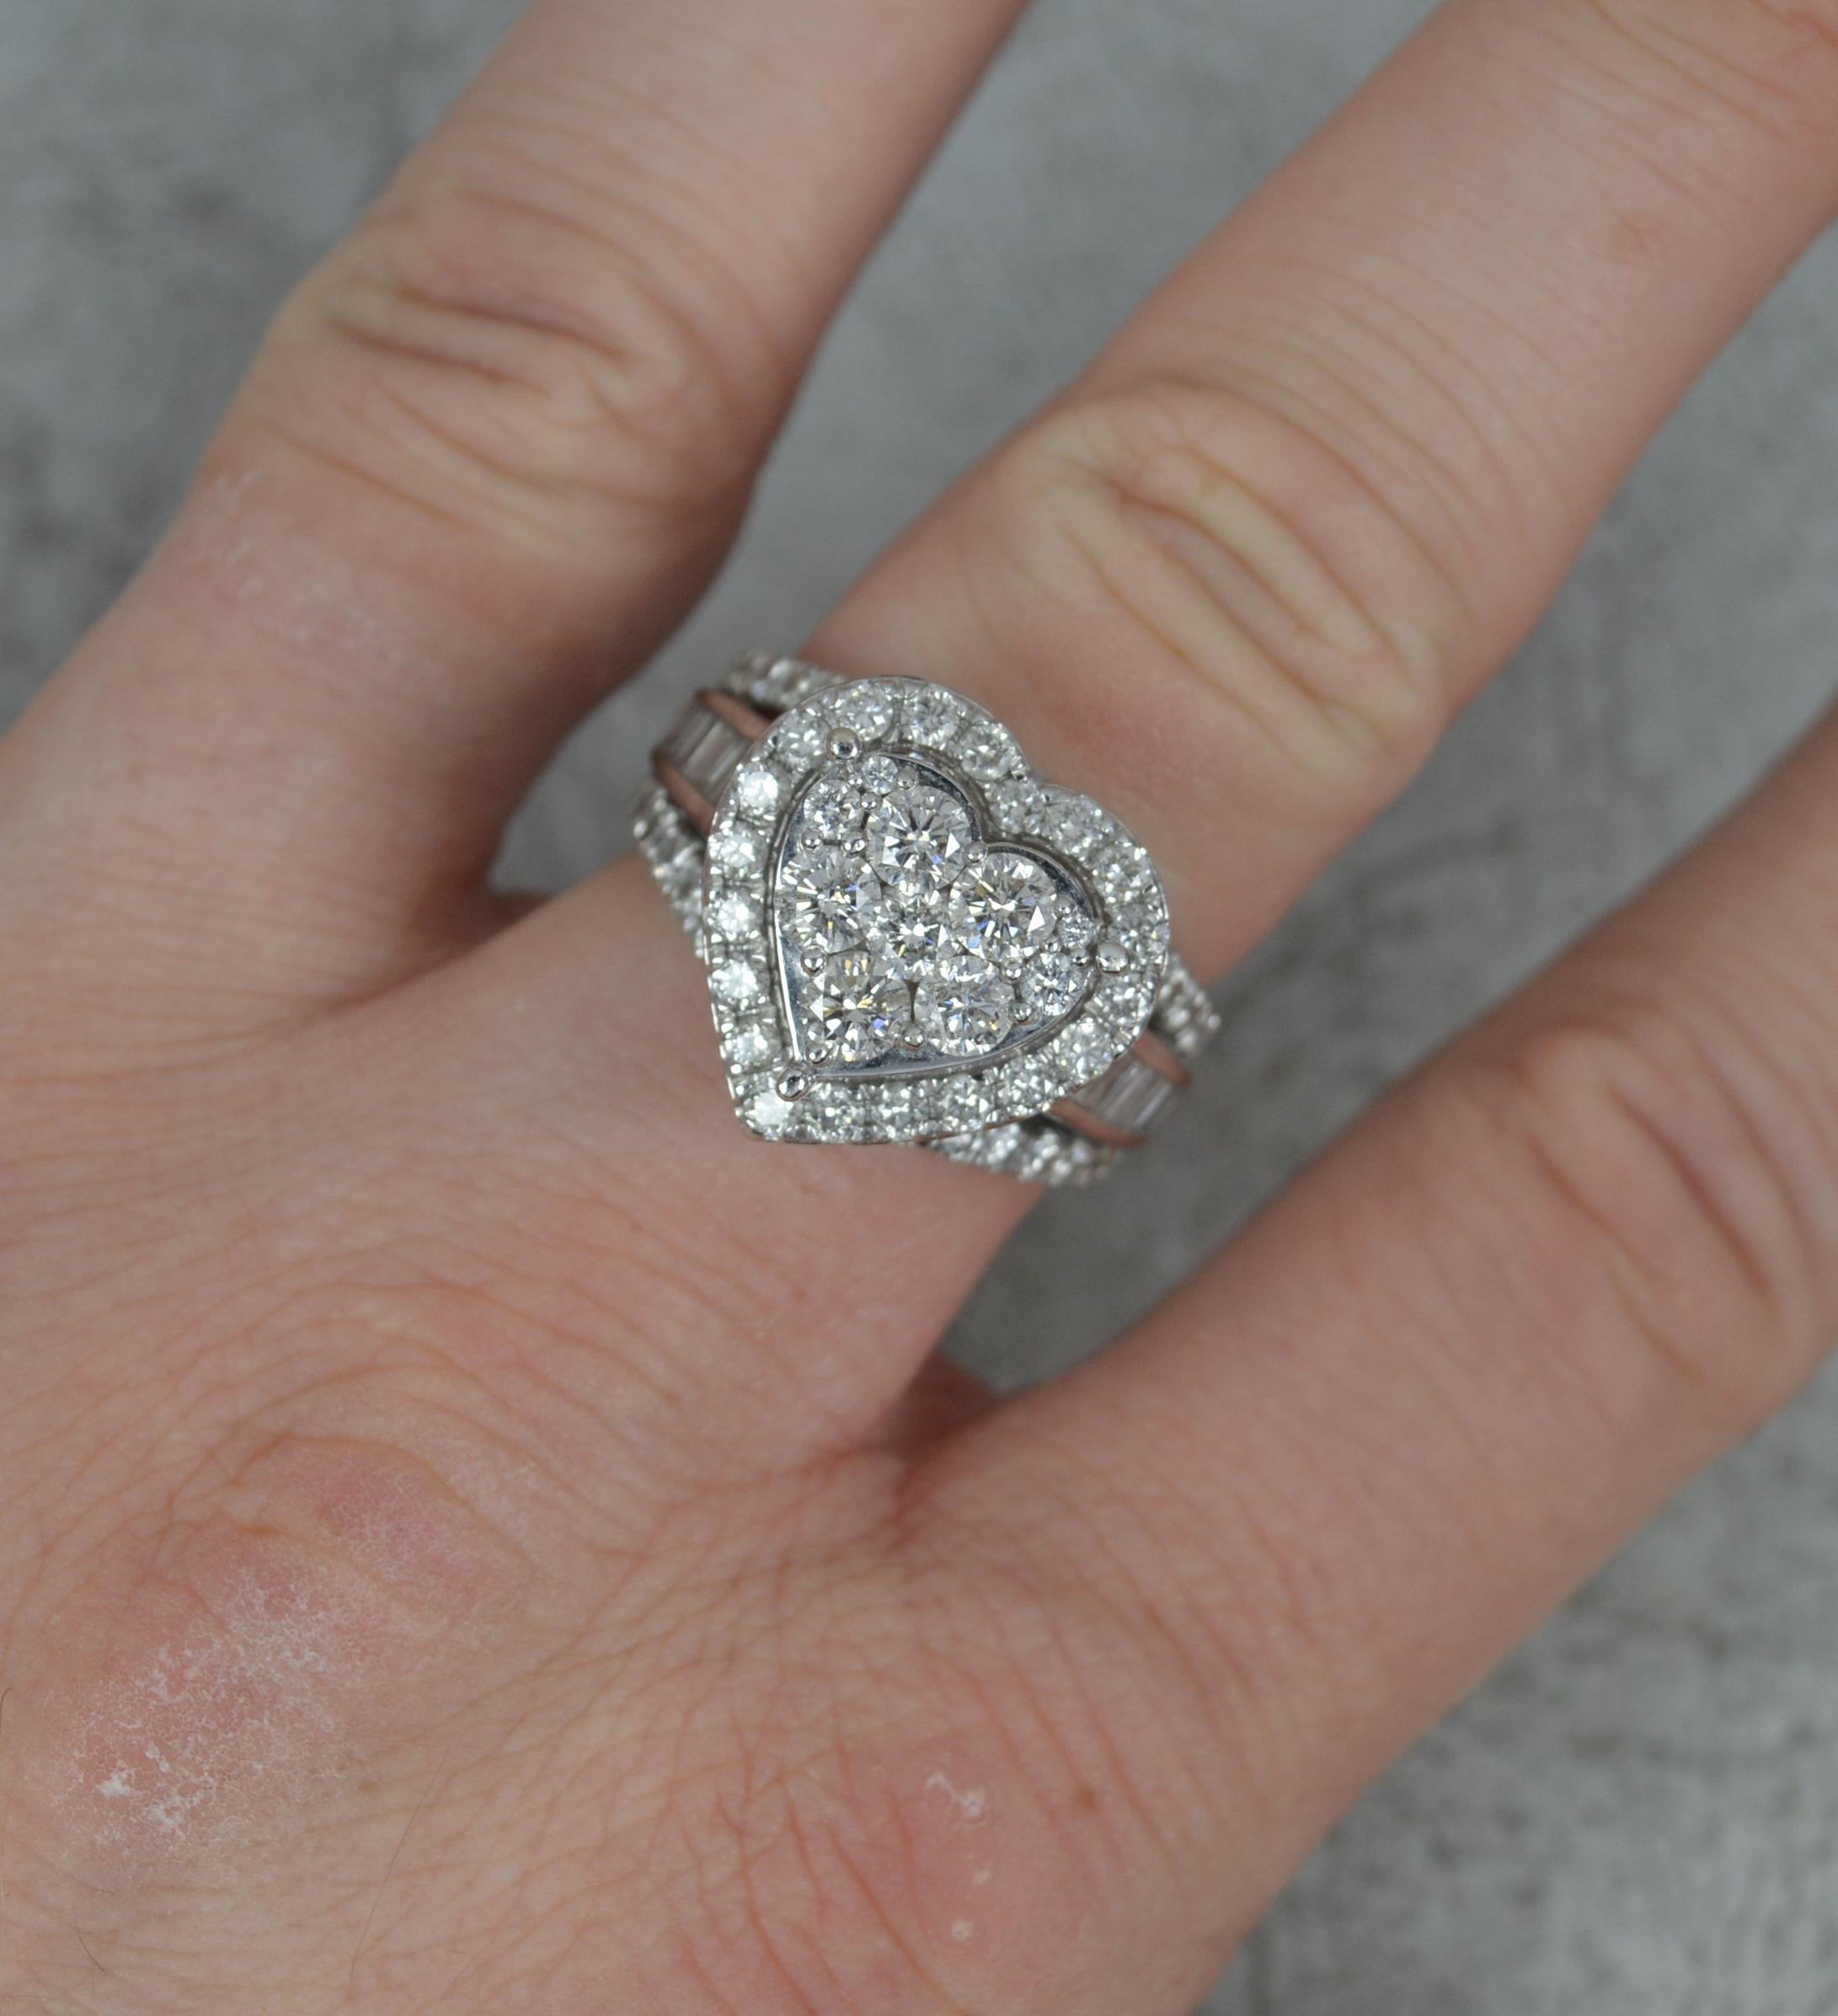 A striking diamond cluster ring.
Solid 9 carat white gold.
Heart shape cluster, 16mm x 17mm. Set with round brilliant cut diamonds with round and baguette cut diamonds in three rows to the shoulders.
Total carat weight 3.00 as confirmed to shank.